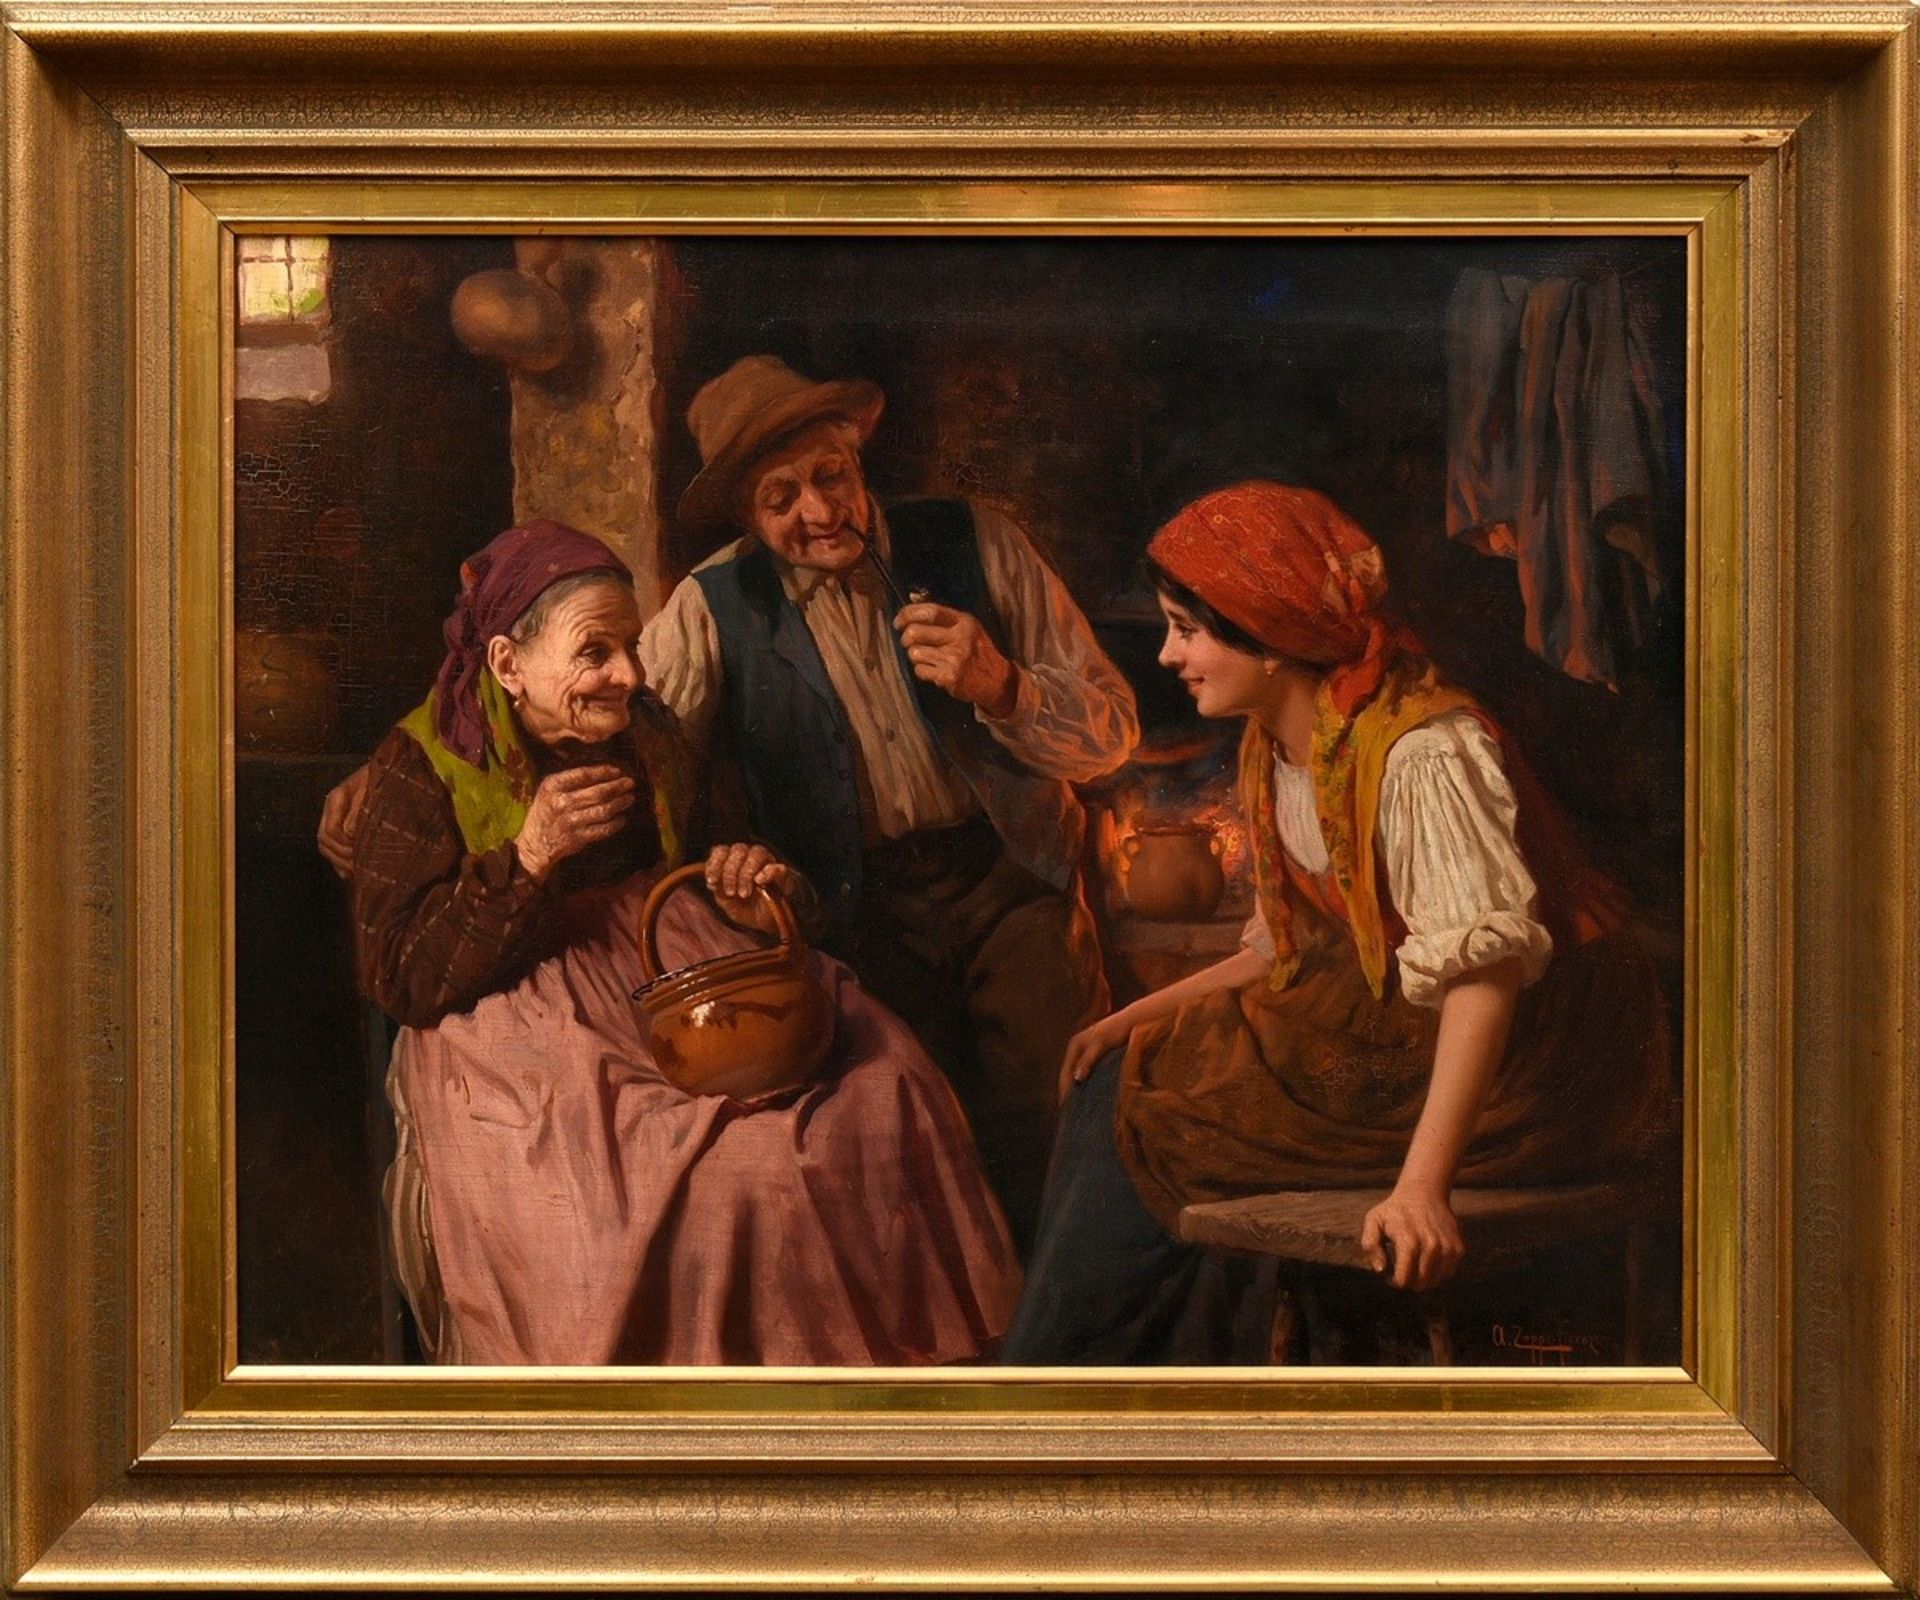 Zoppi, Antonio (1860-1926) "Conversation at the hearth", oil/canvas, sign./inscr. lower right, vers - Image 2 of 11